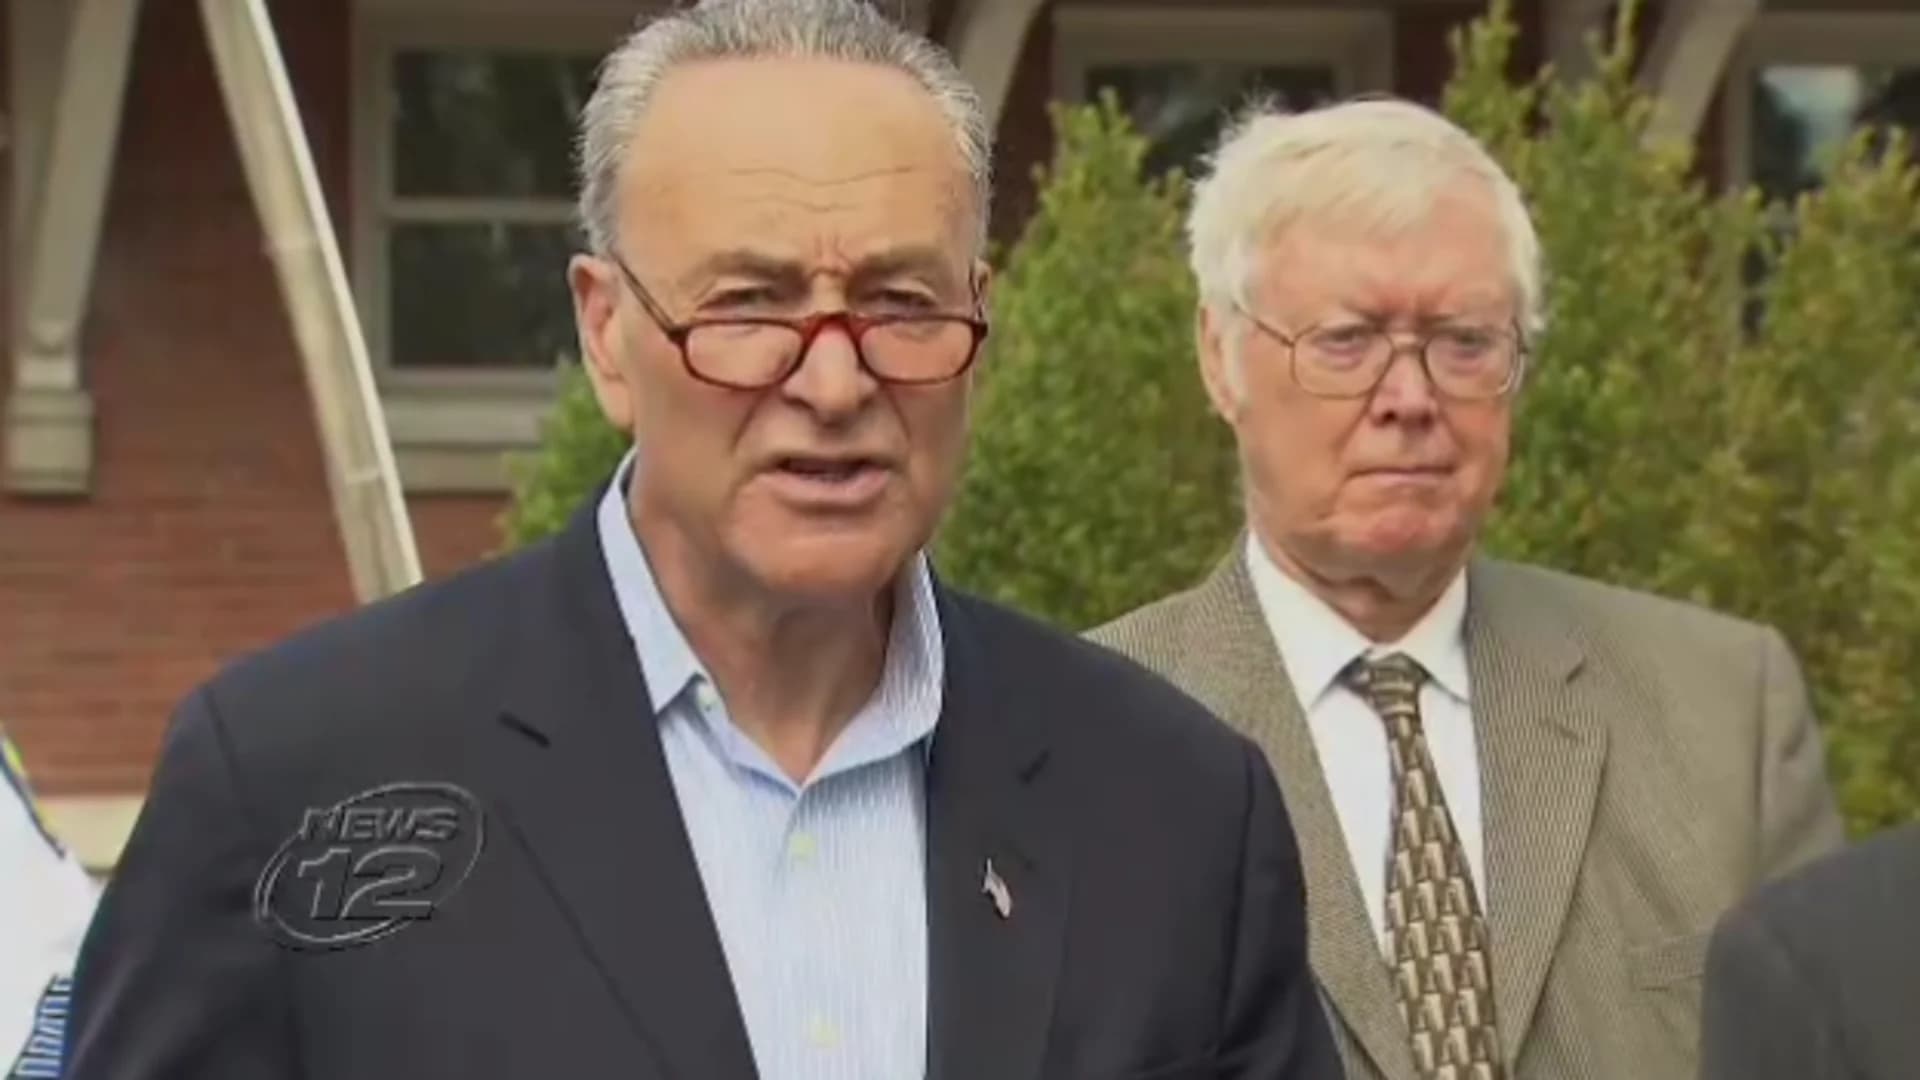 Schumer calls for CSX changes in wake of accident